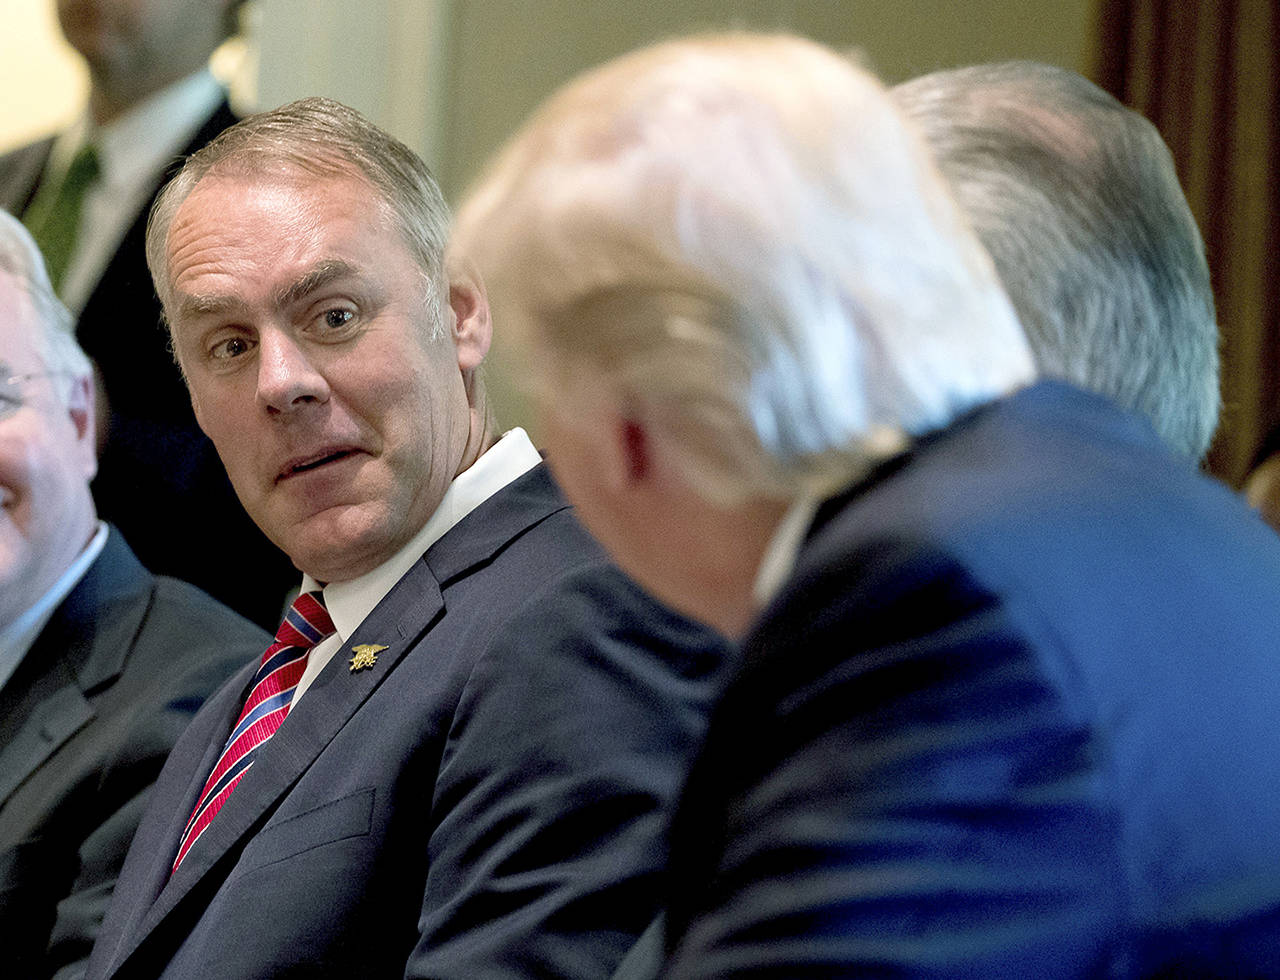 In this June 12 photo, Interior Secretary Ryan Zinke listens as President Donald Trump speaks during a Cabinet meeting in the Cabinet Room of the White House in Washington. (AP Photo/Andrew Harnik, File)